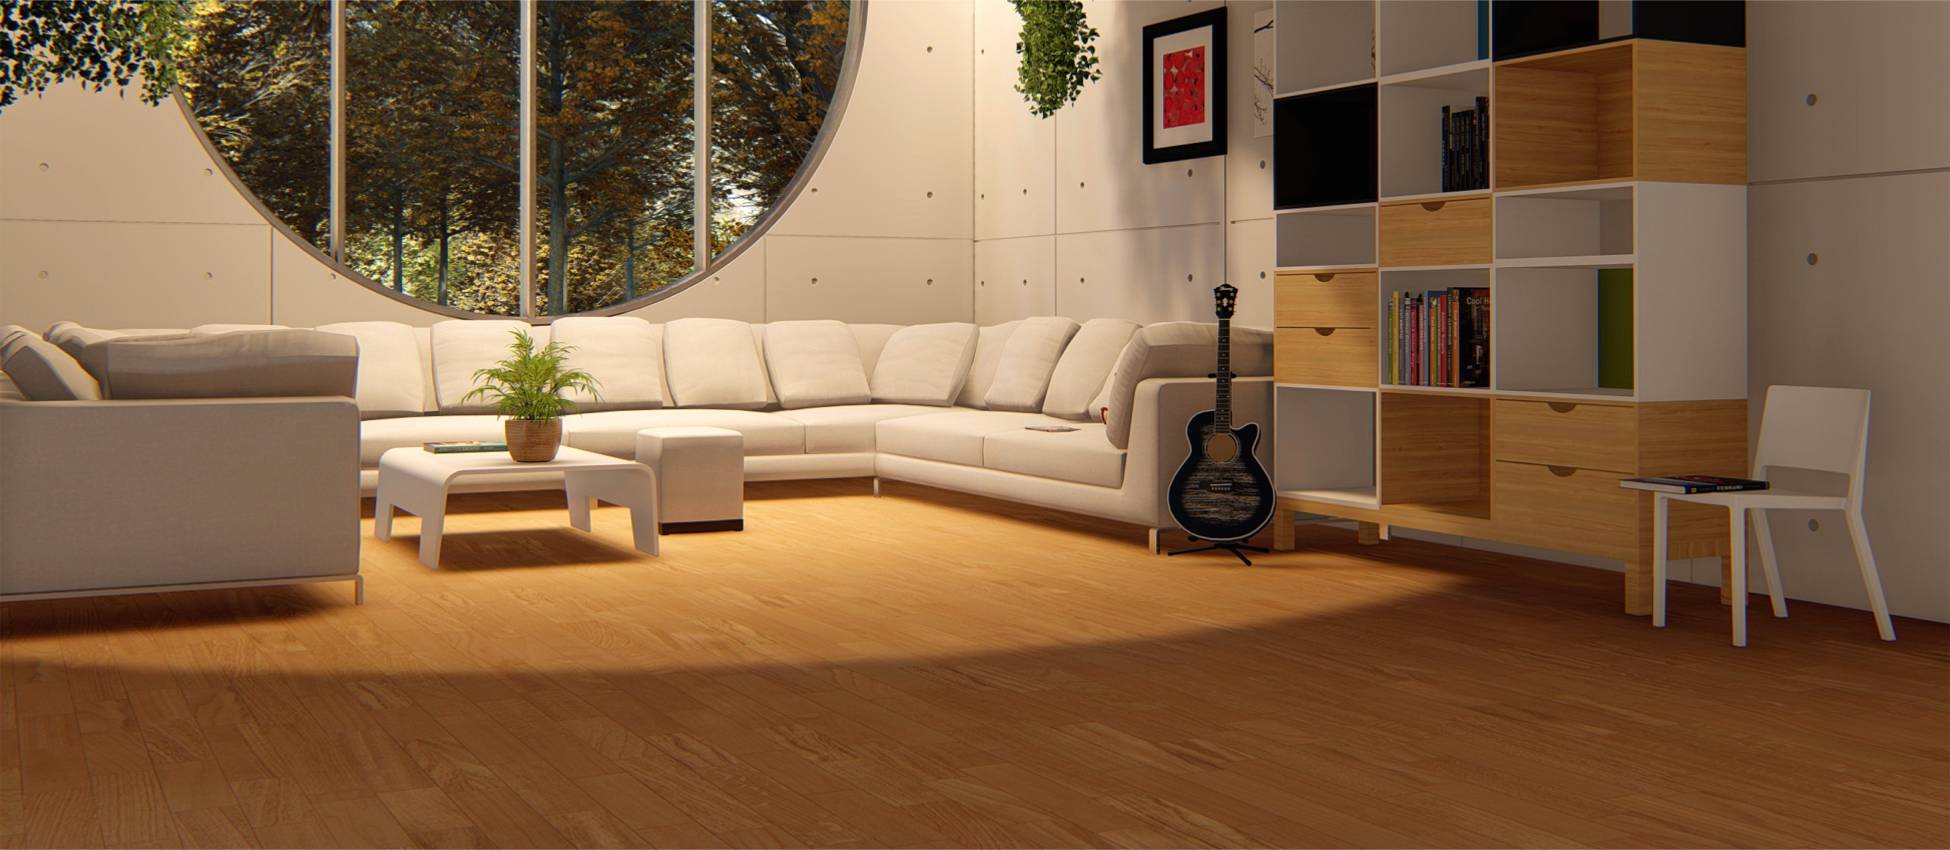 Engineered wood flooring in contemporary lounge. Floor installation services by